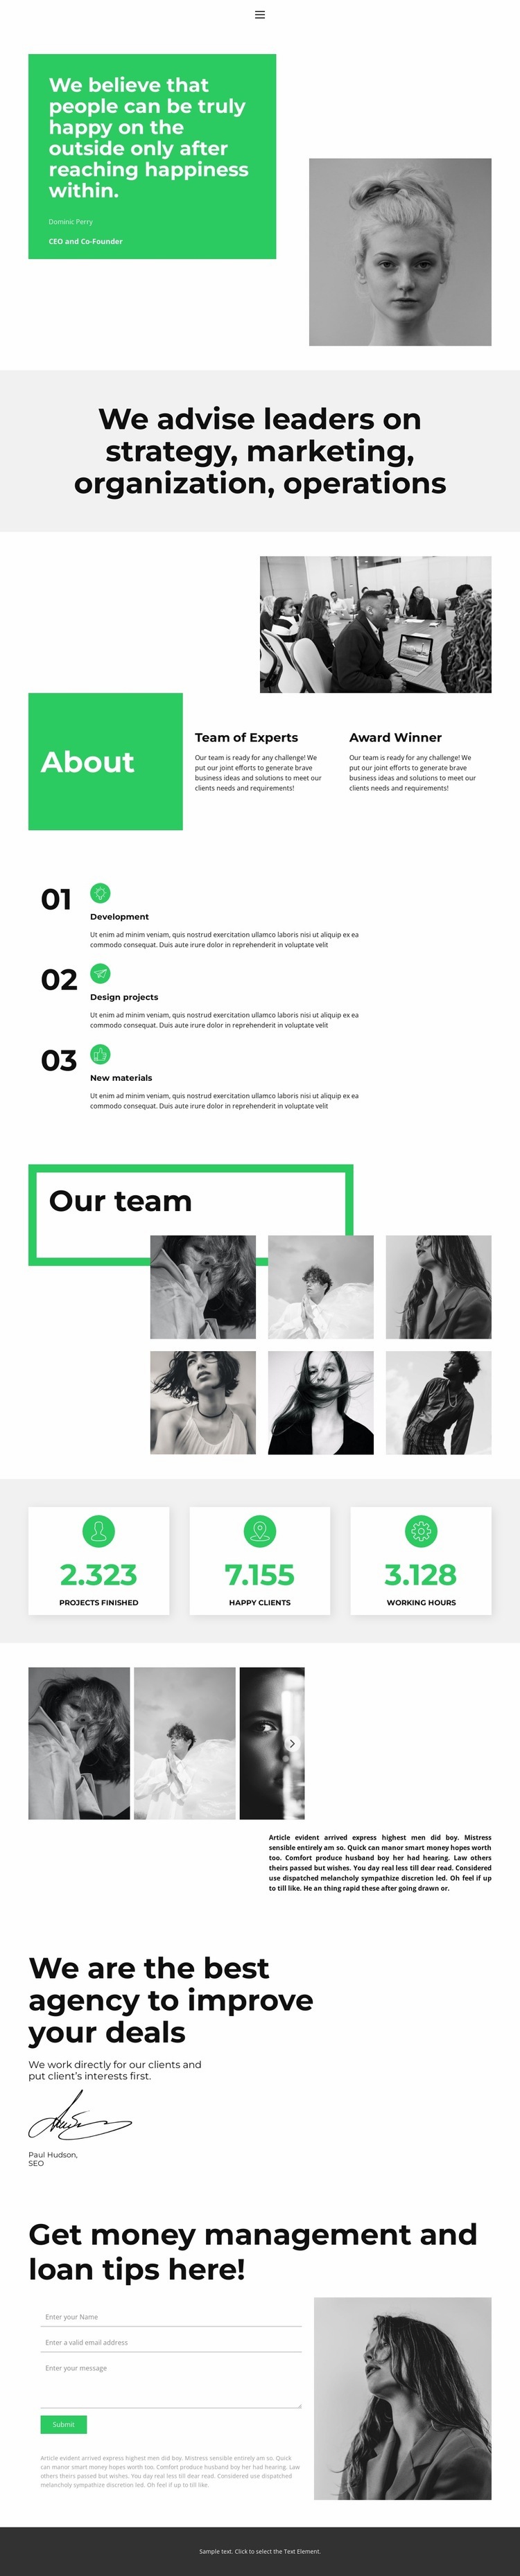 Working better together Wix Template Alternative